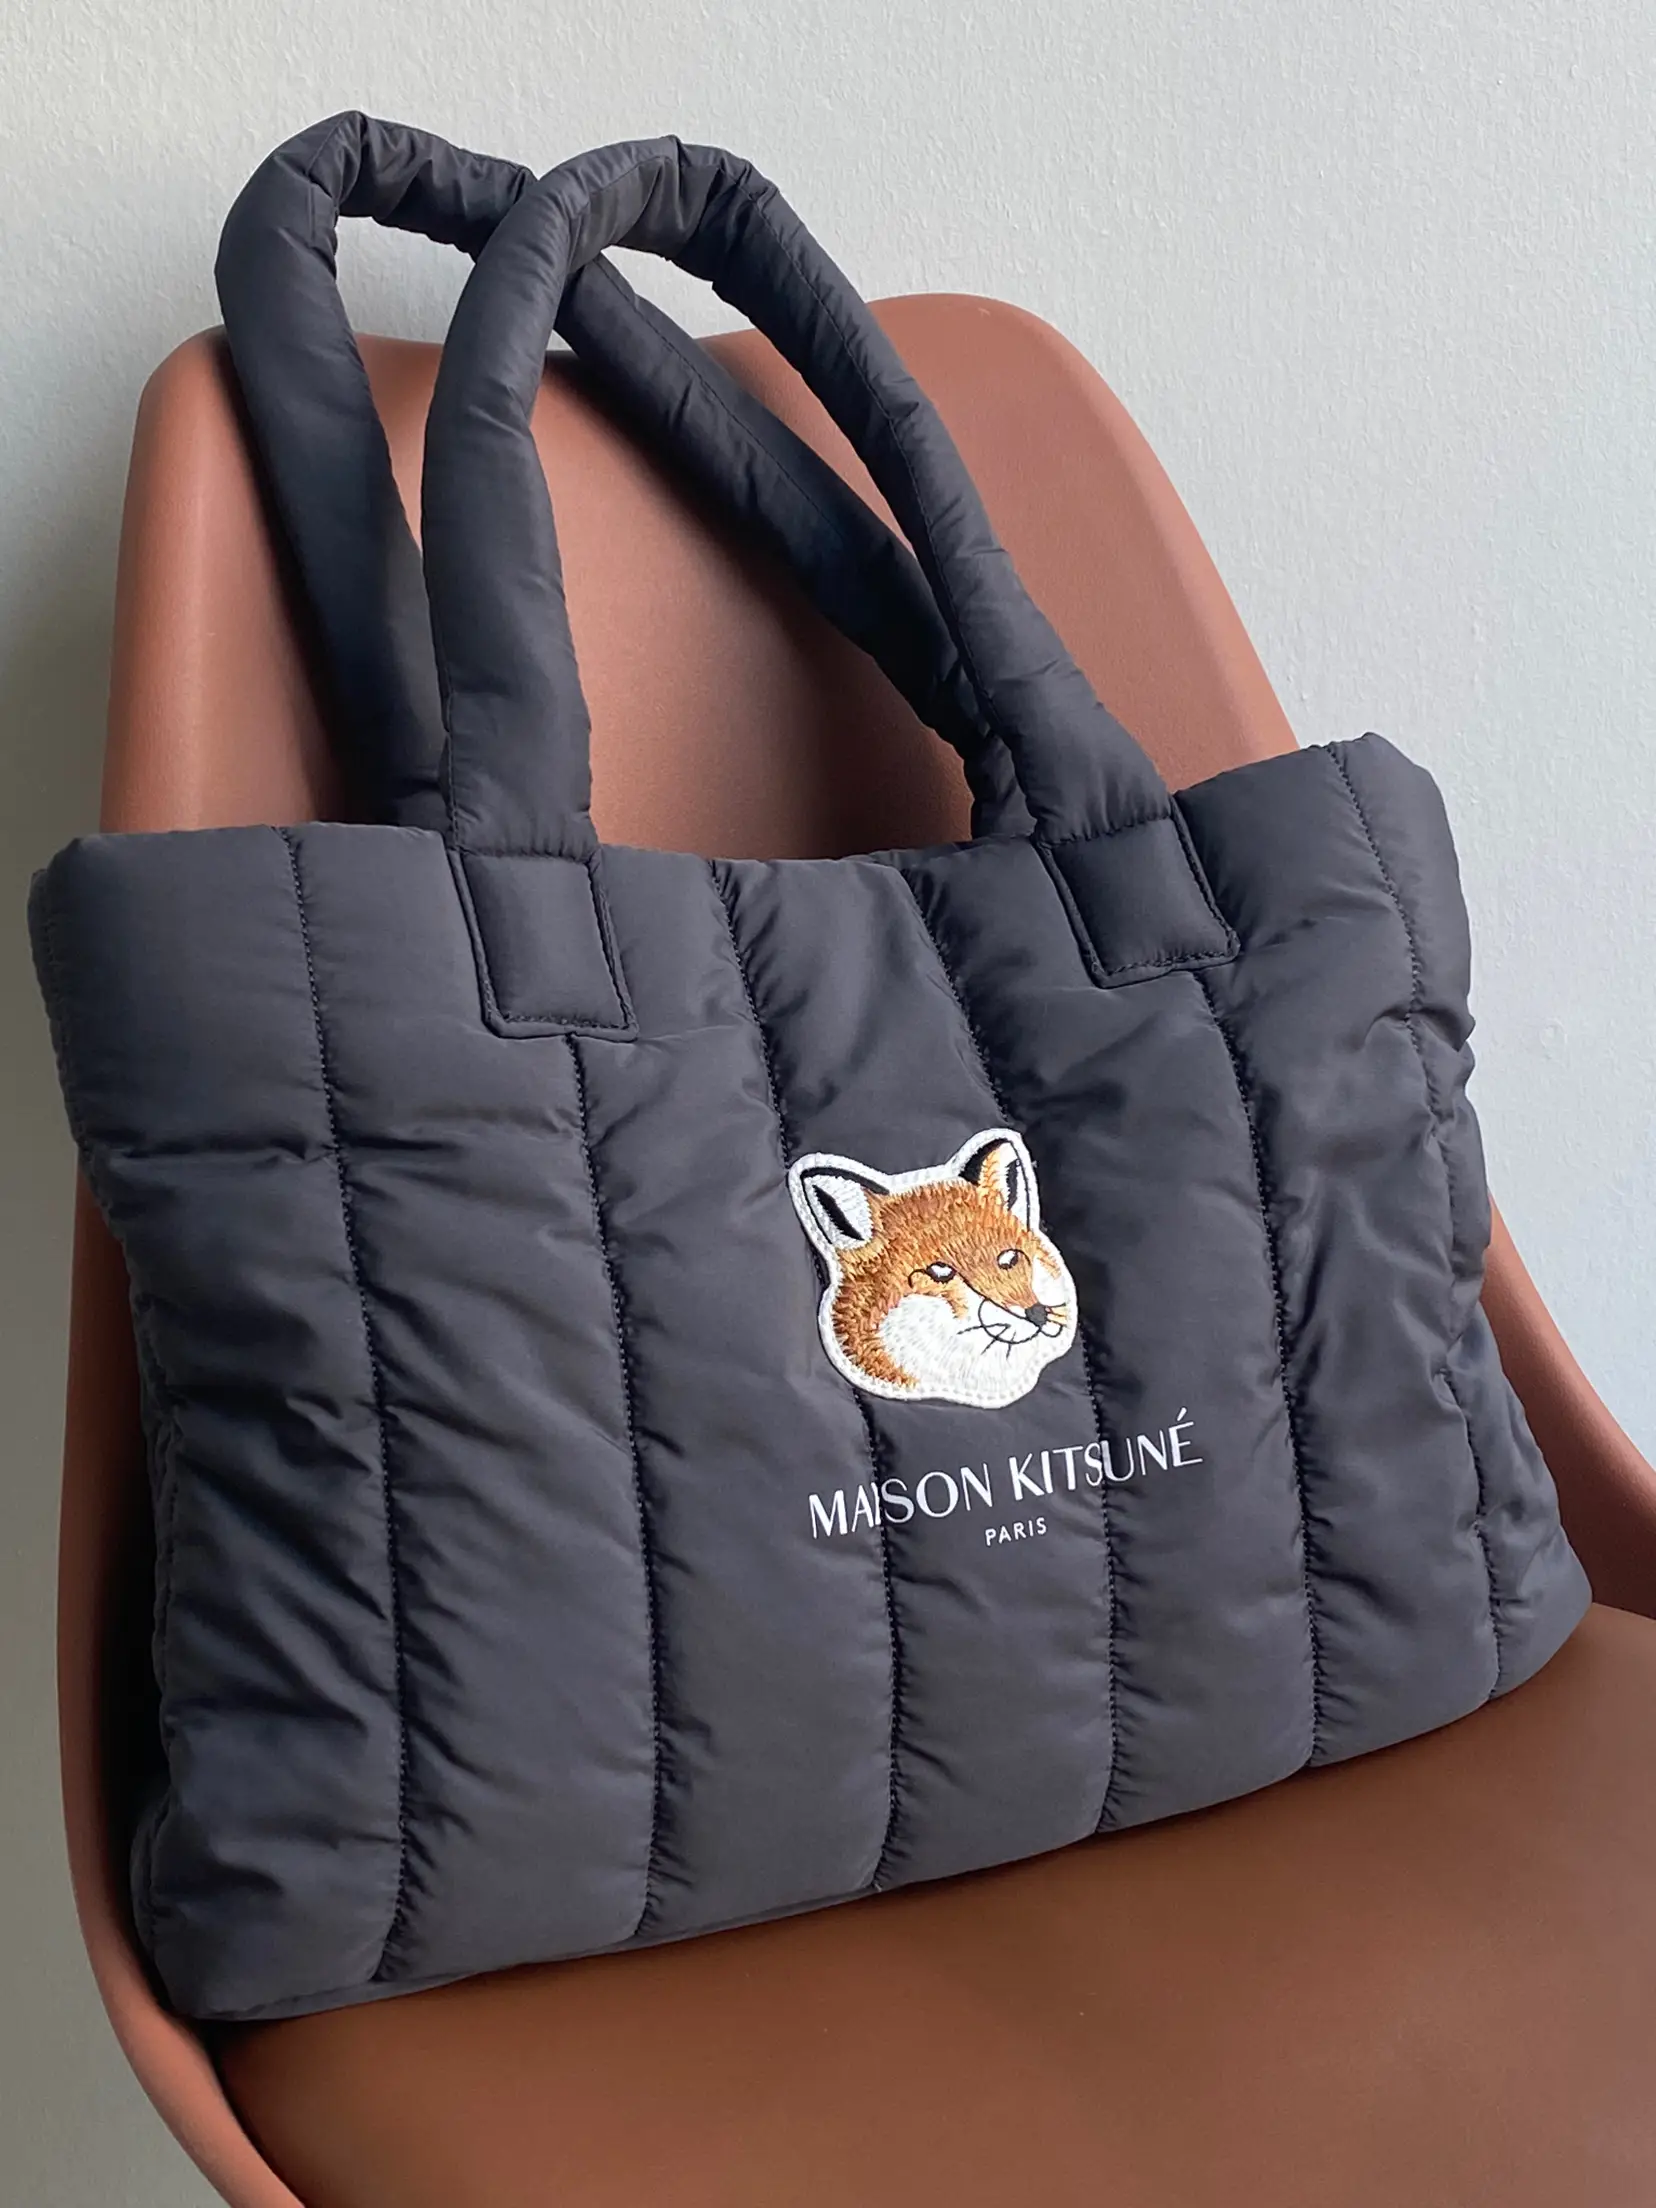 Hunting   🏻 a rare bag.🦊 | Gallery posted by Mookyiww | Lemon8